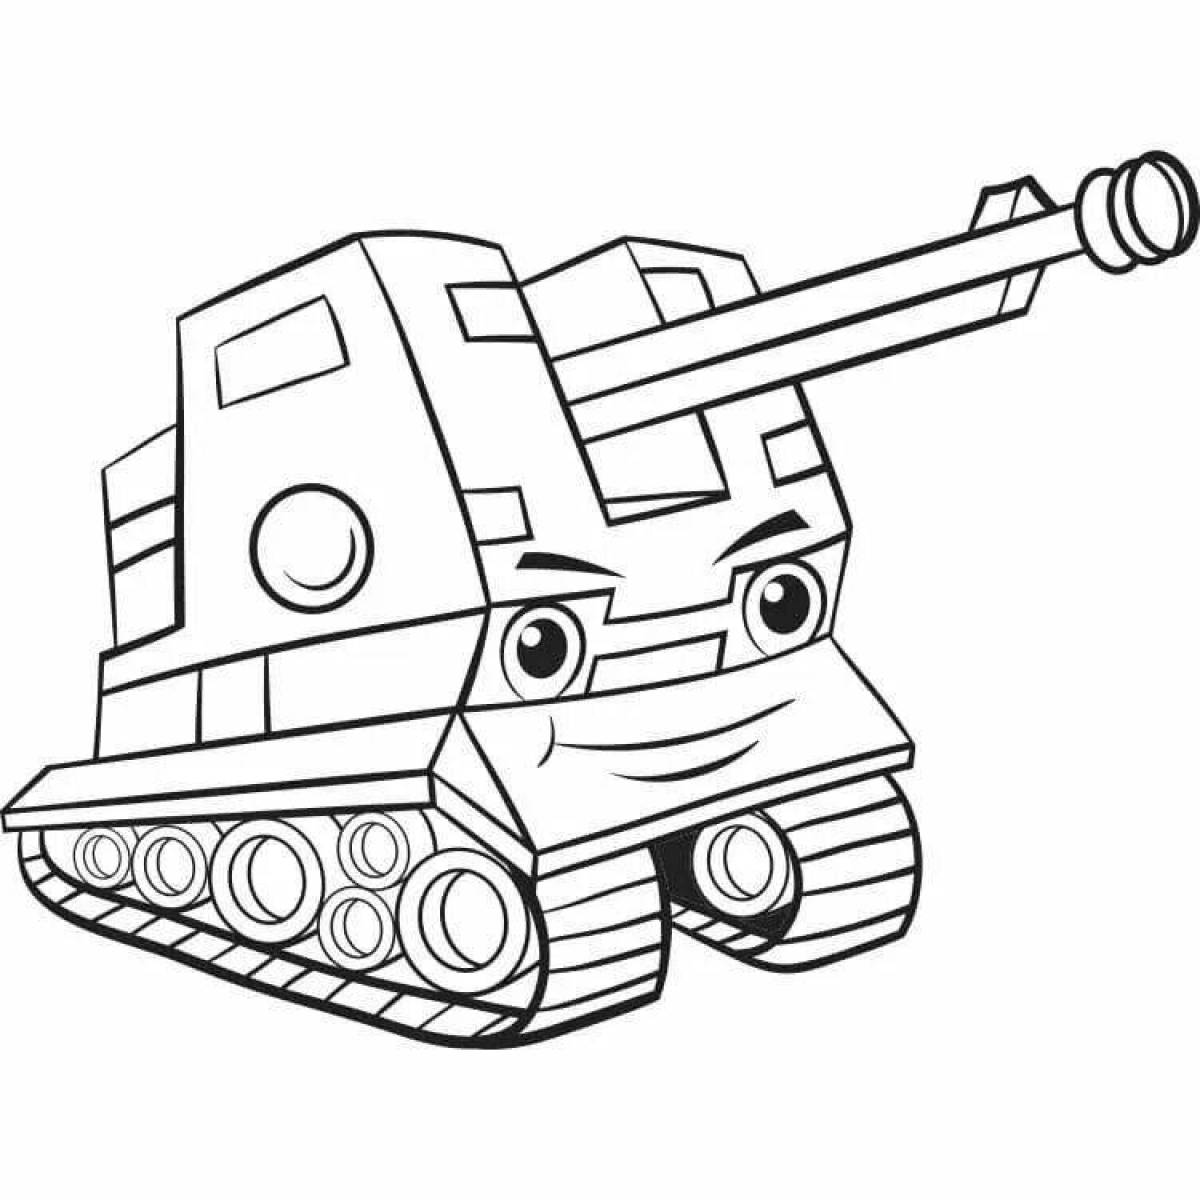 Generous gerand tank coloring page